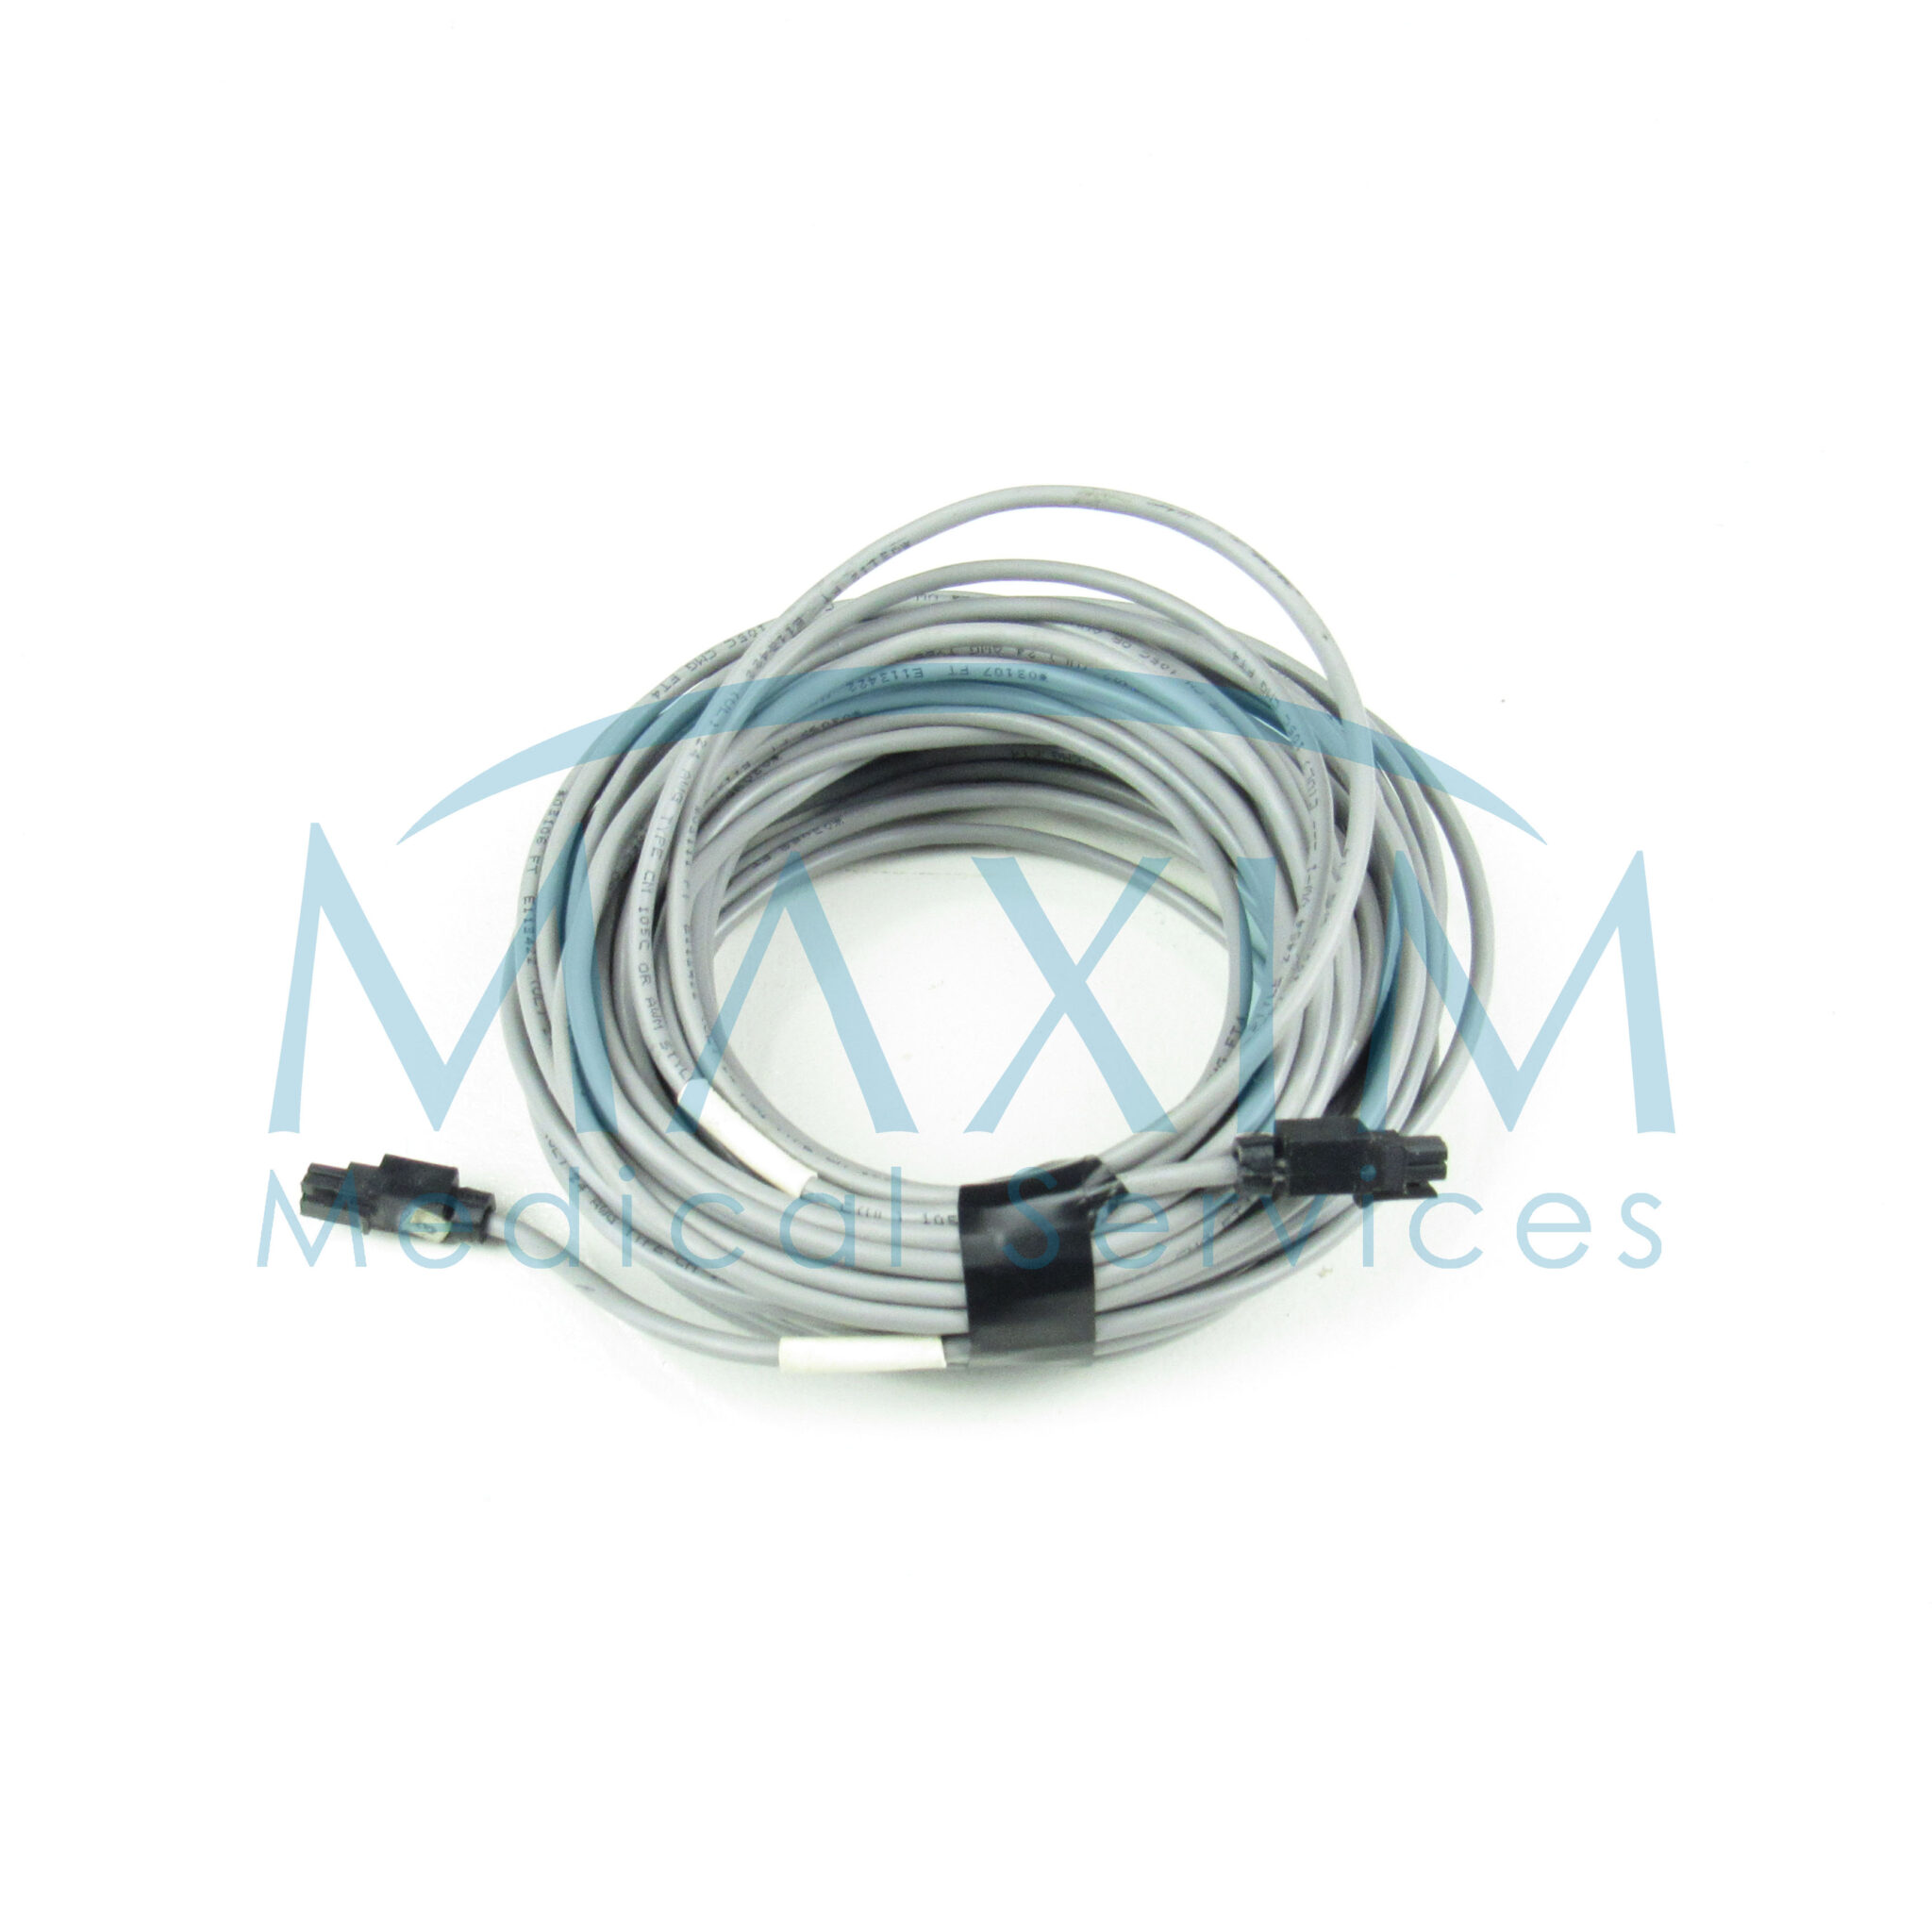 Berchtold Chromophare E-Series / F-Series 4-Pole Canbus Wire